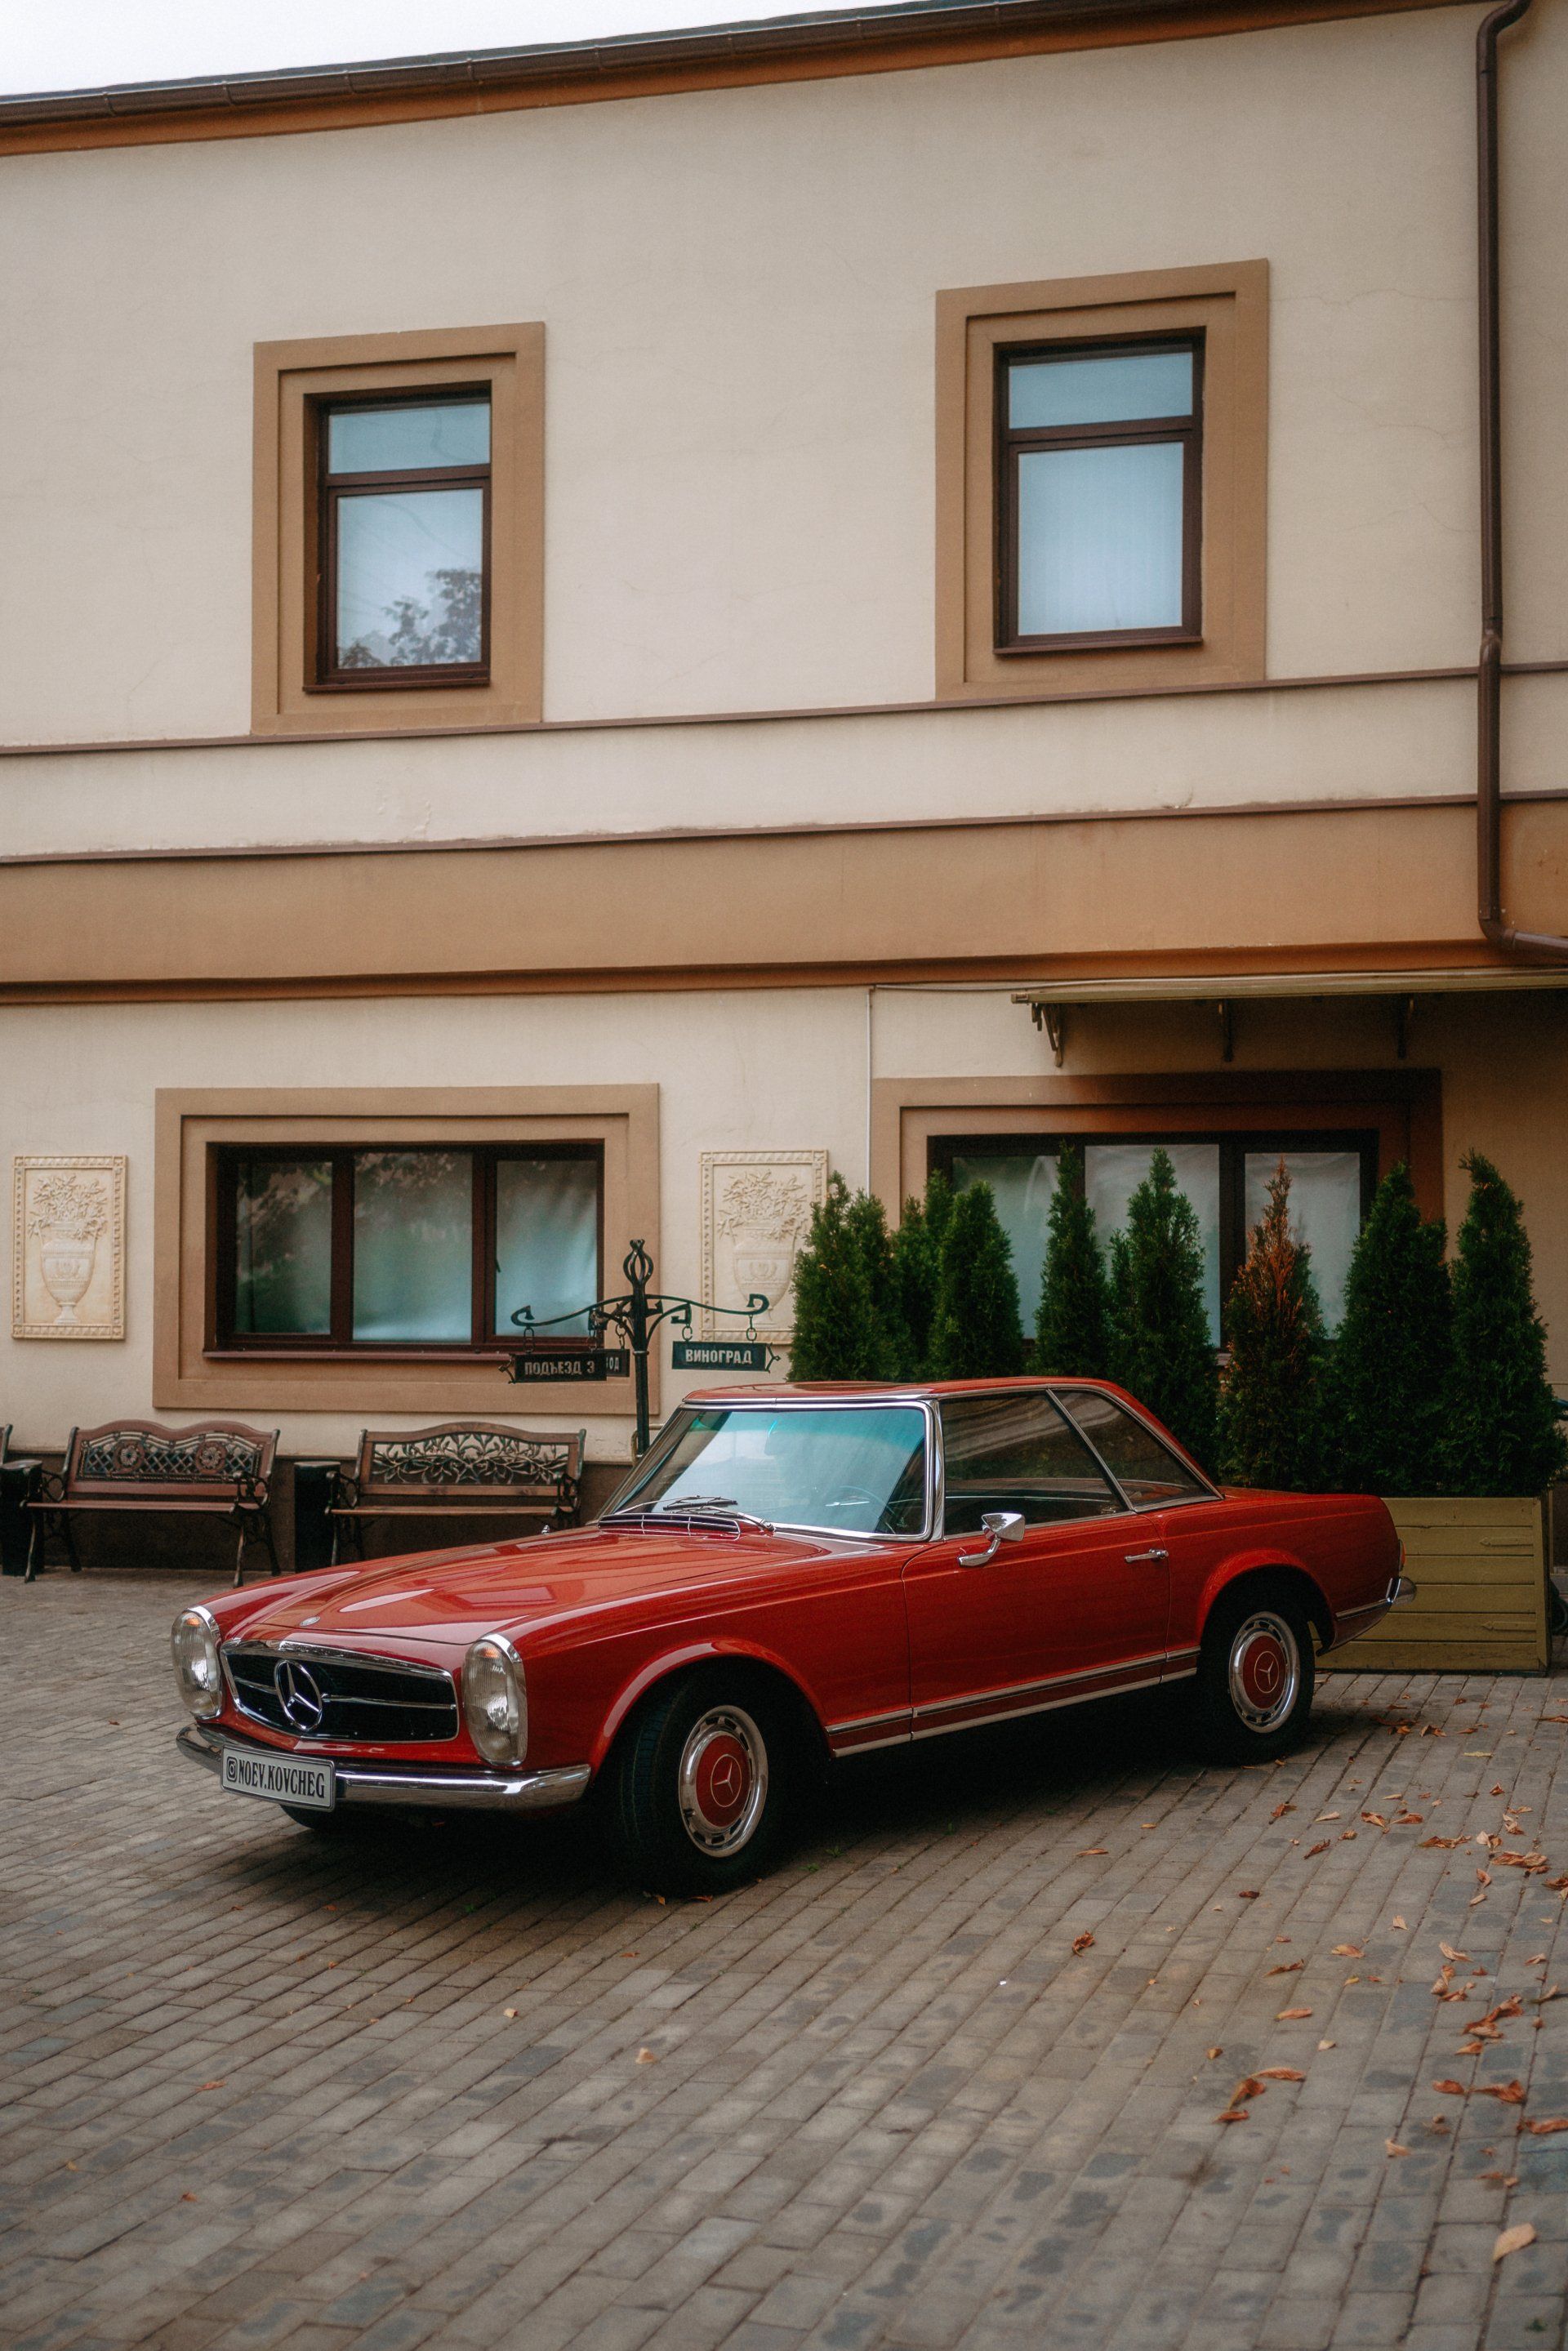 Red classic Mercedez car parked in front of building